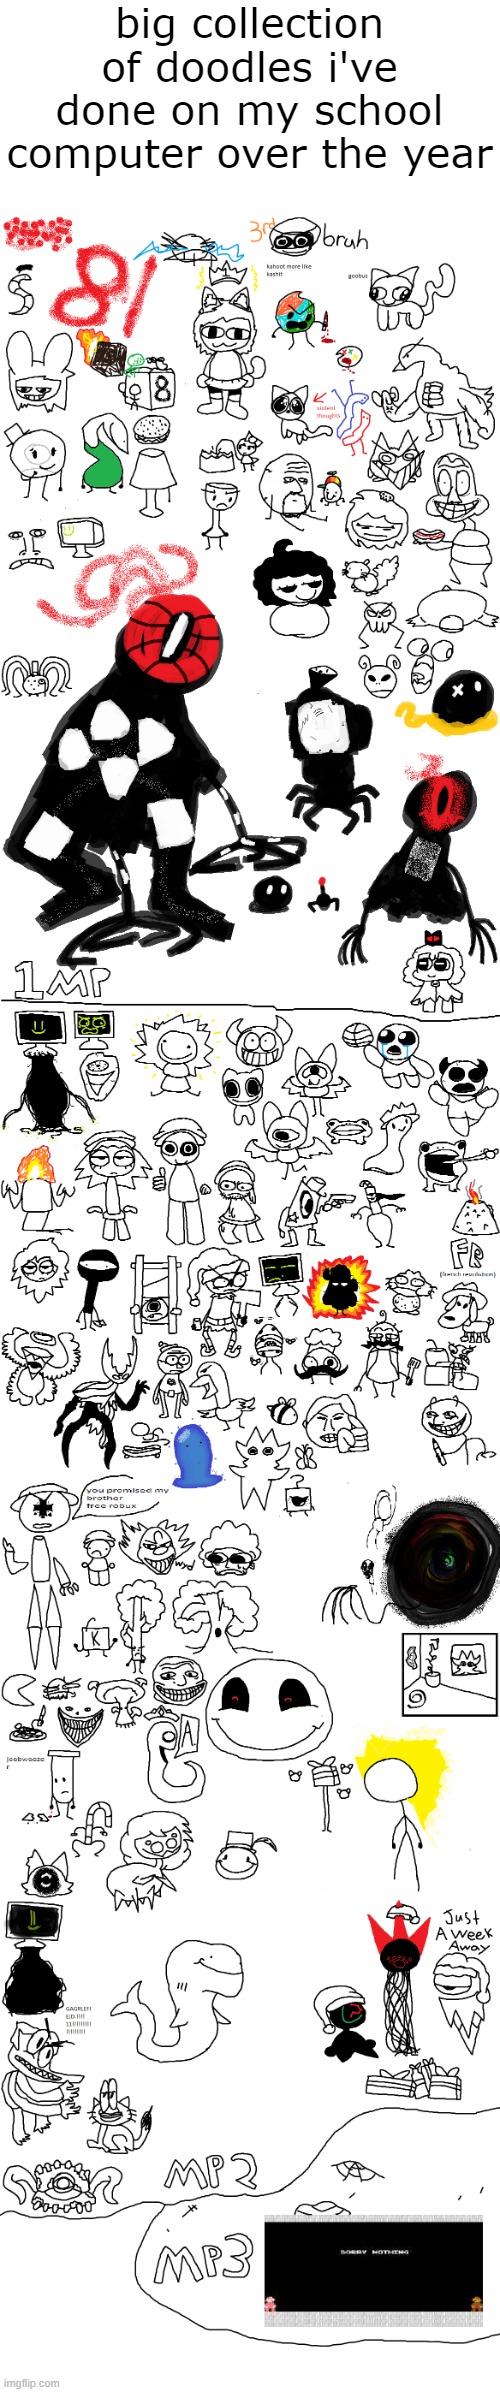 big collection of doodles i've done on my school computer over the year | made w/ Imgflip meme maker